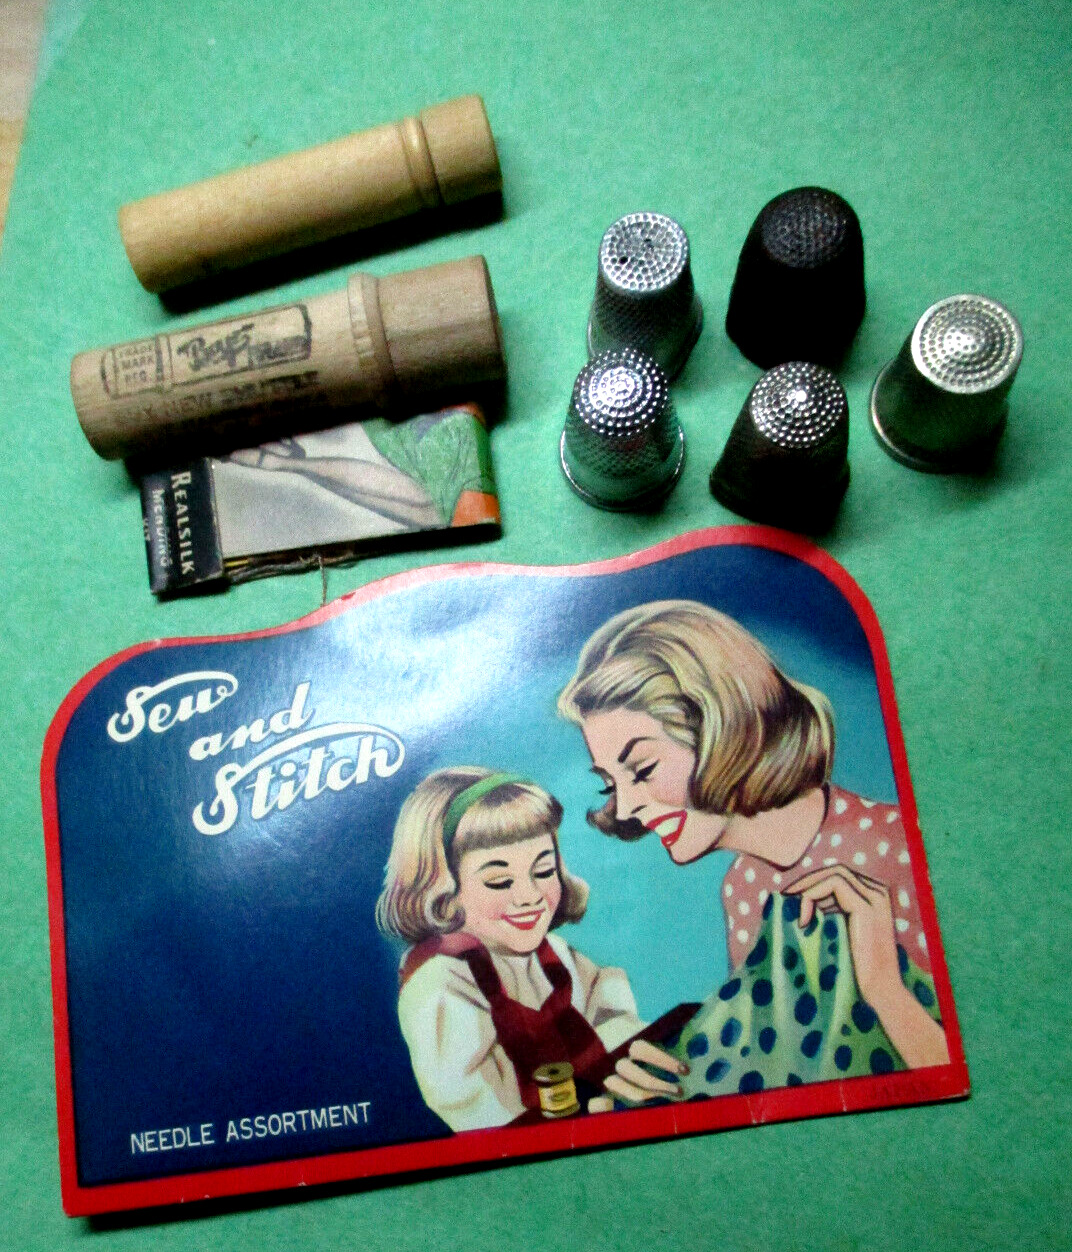 Vintage Lot of Sewing Items silk stocking repair kit, thimbles, needle pack wood